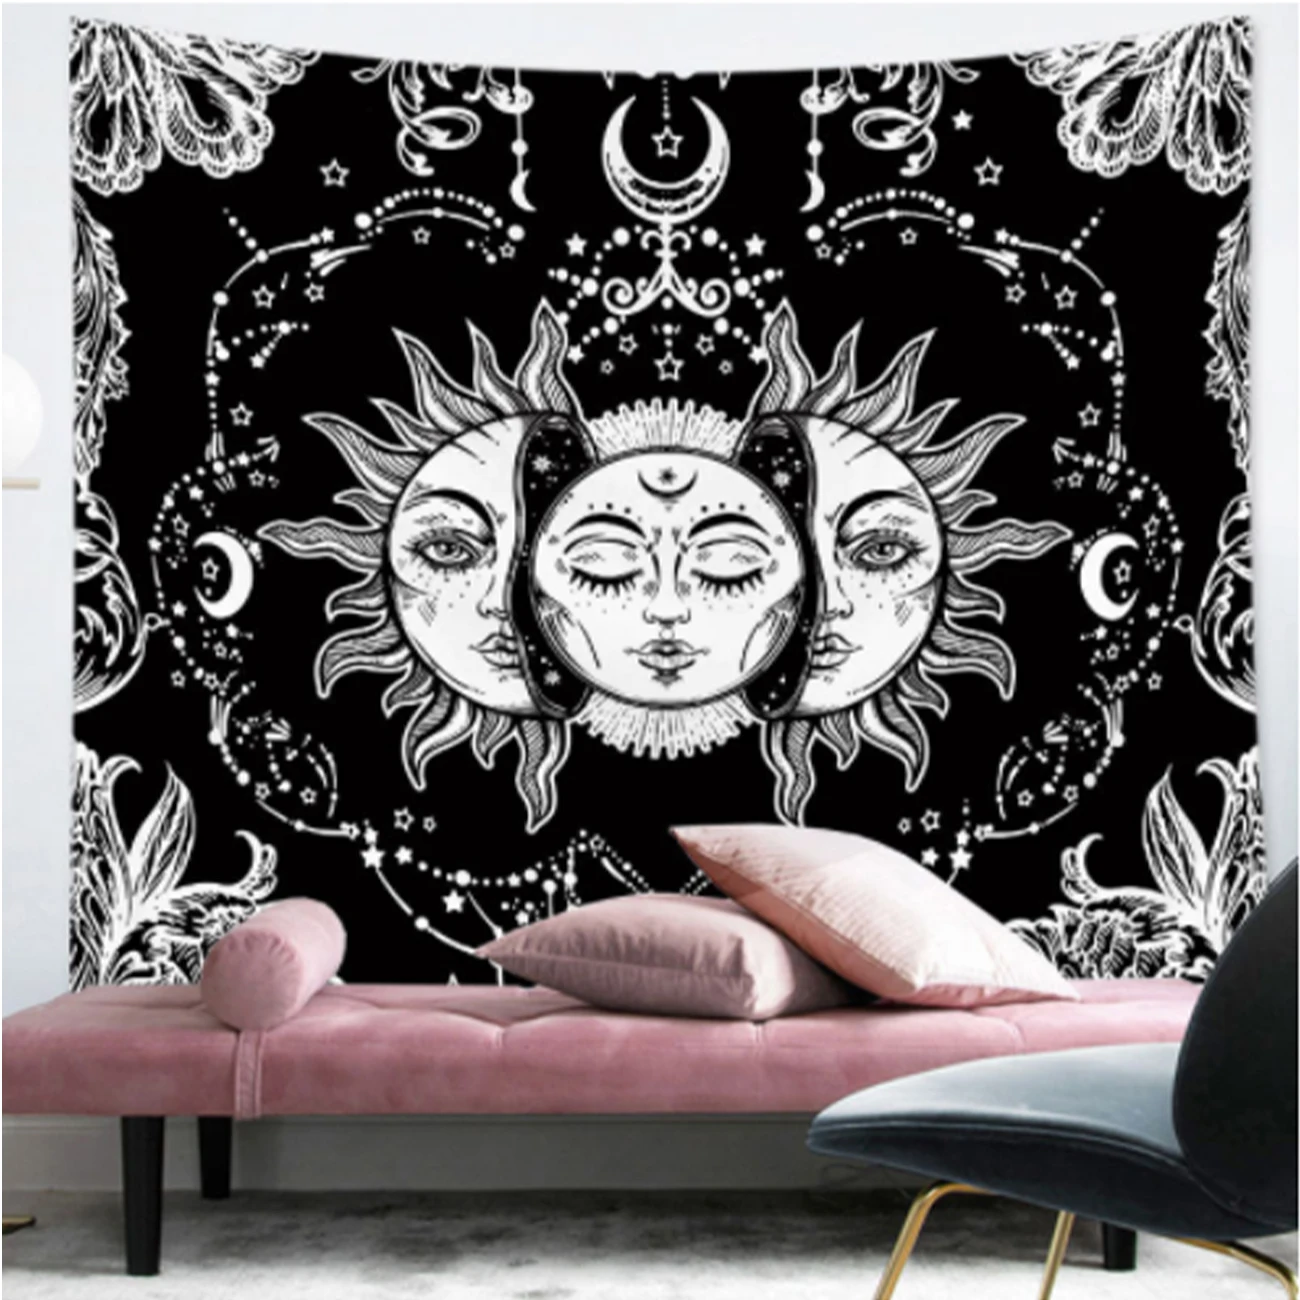 

Mandala Tapestry White Black Sun And Moon Tapestry Wall Hanging Tarot Hippie Wall Rugs Dorm Home art Decor Astrology Divination